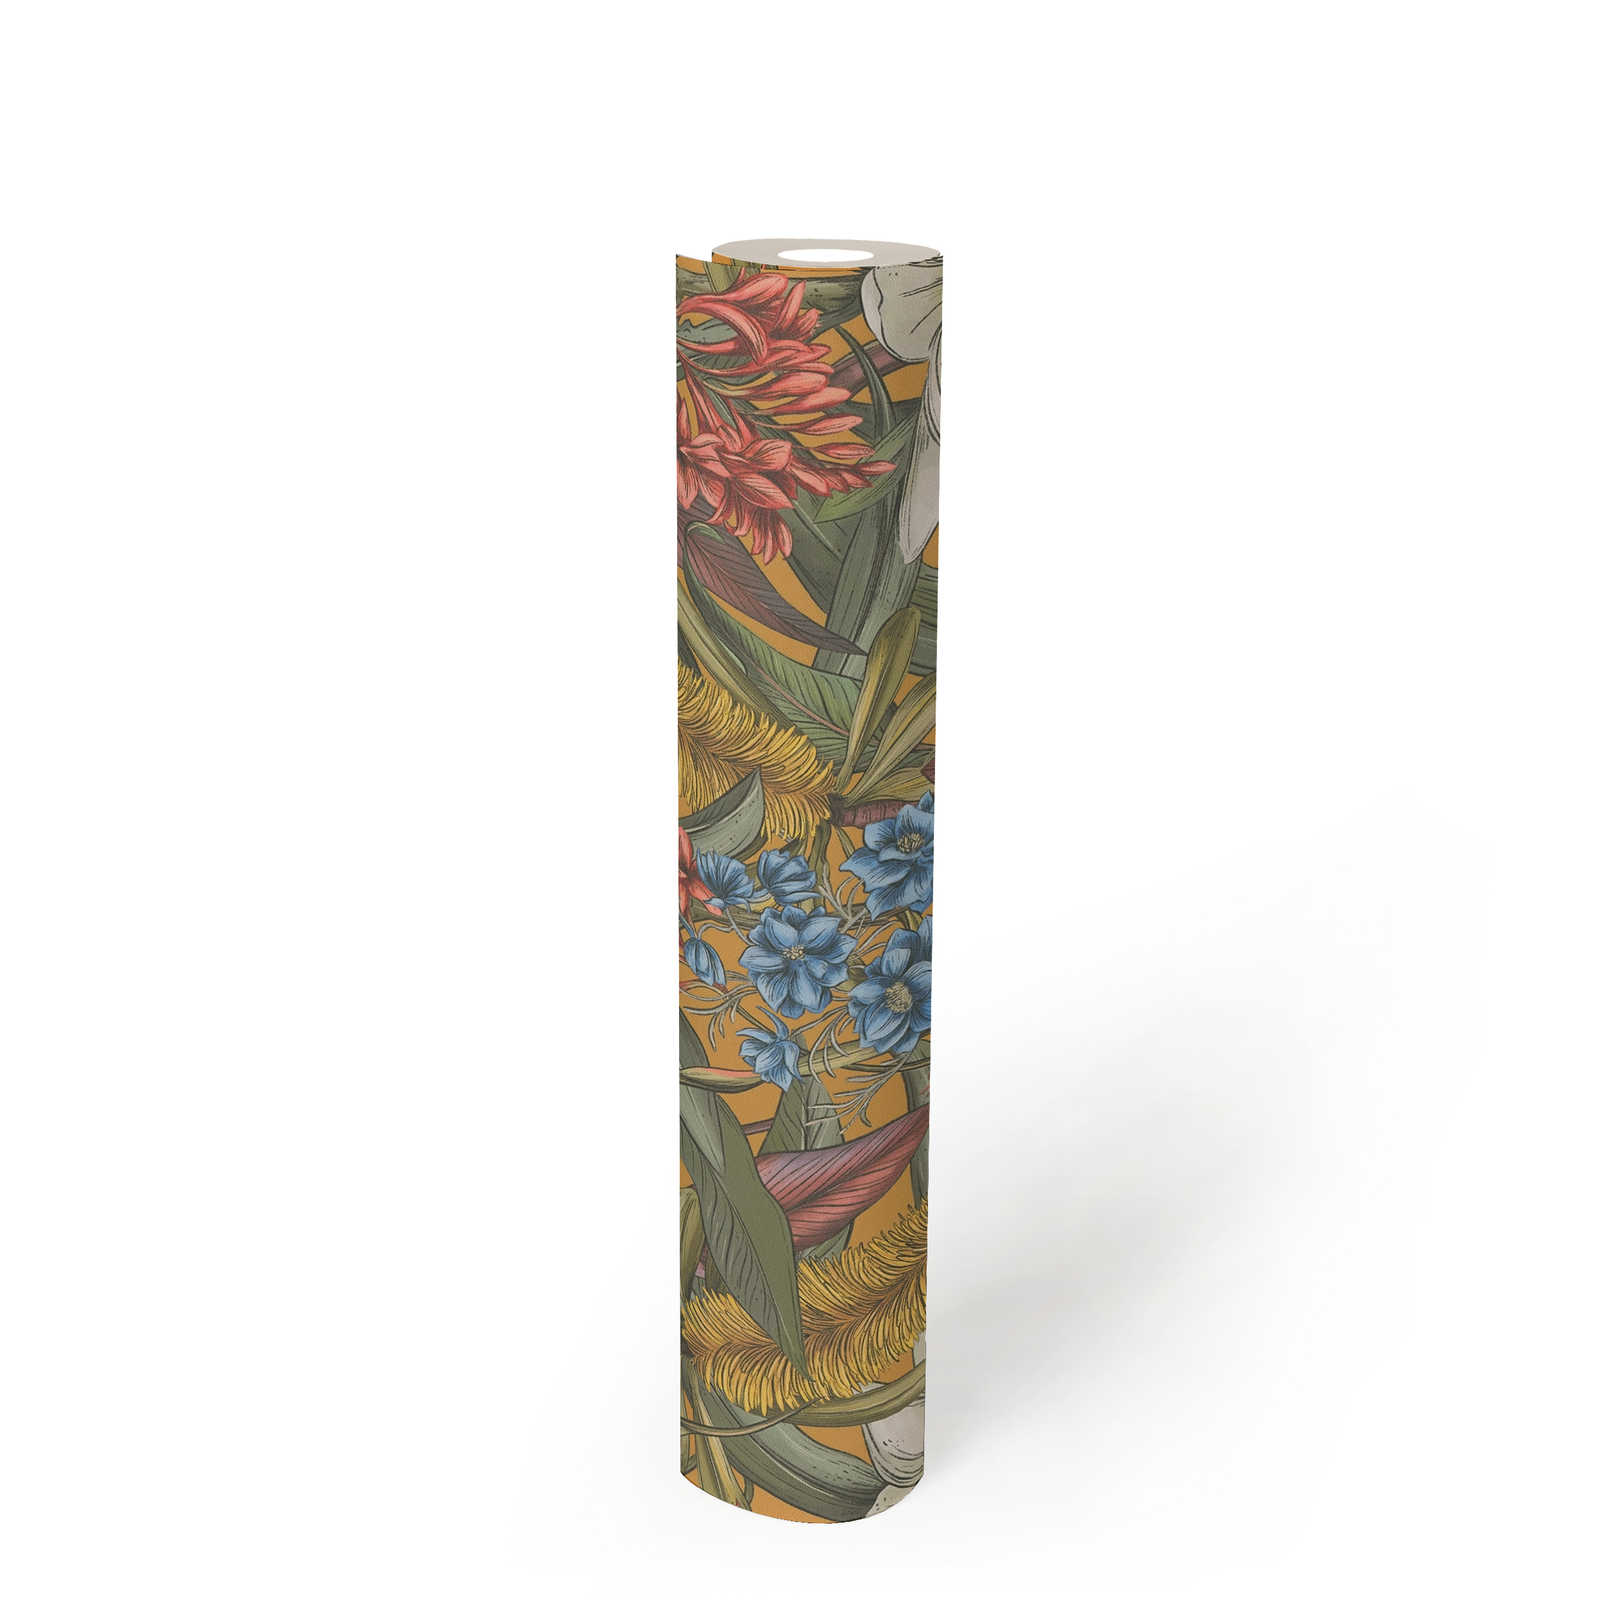             Floral style jungle wallpaper with leaves & flowers textured matt - multicoloured, yellow, green
        